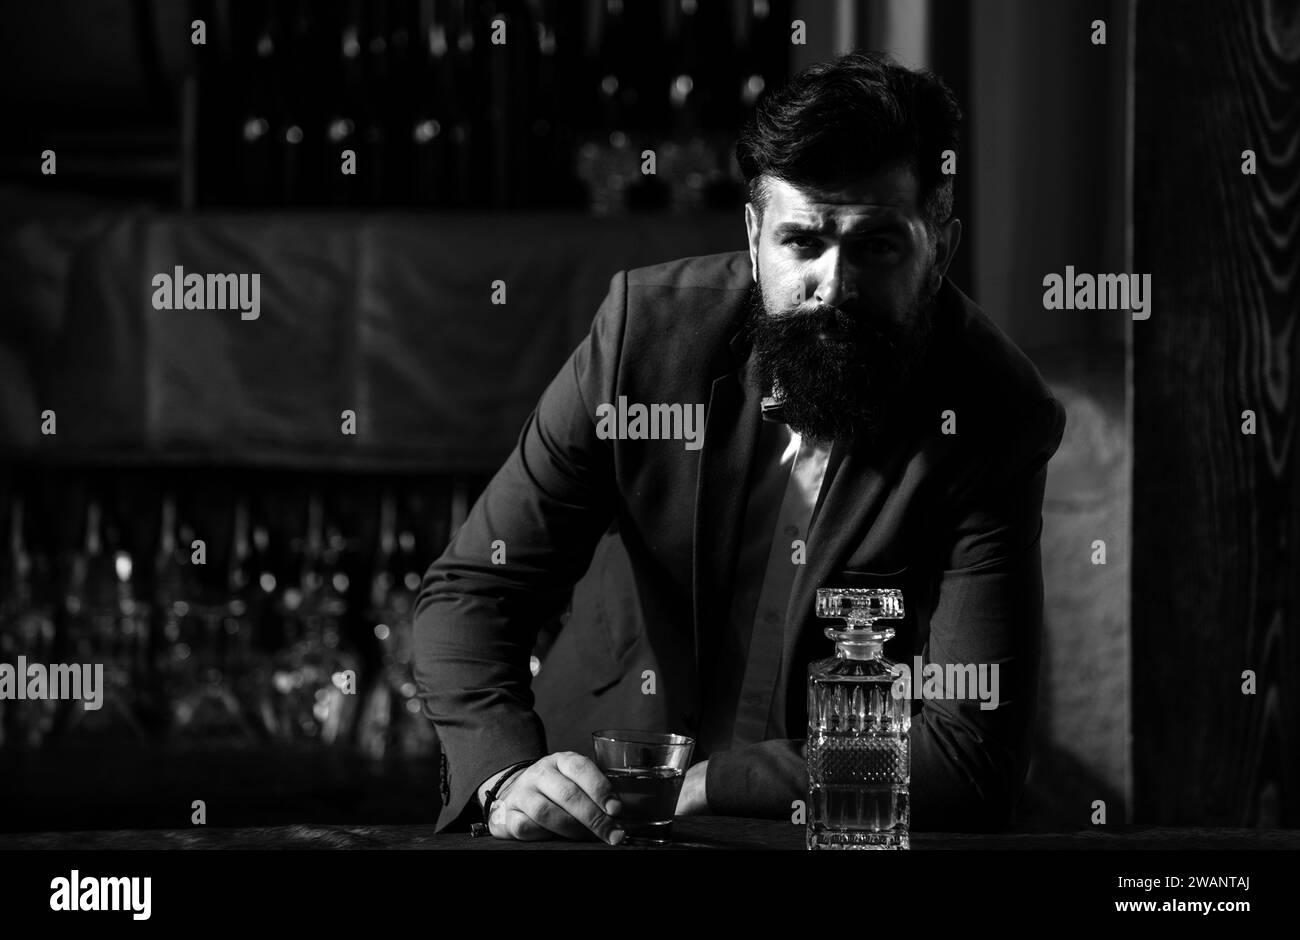 Barman luxury beverage concept. Man with beard holds glass with alcohol in bar. Waiter bartender in vintage vest with whiskey or scotch on tray. Stock Photo